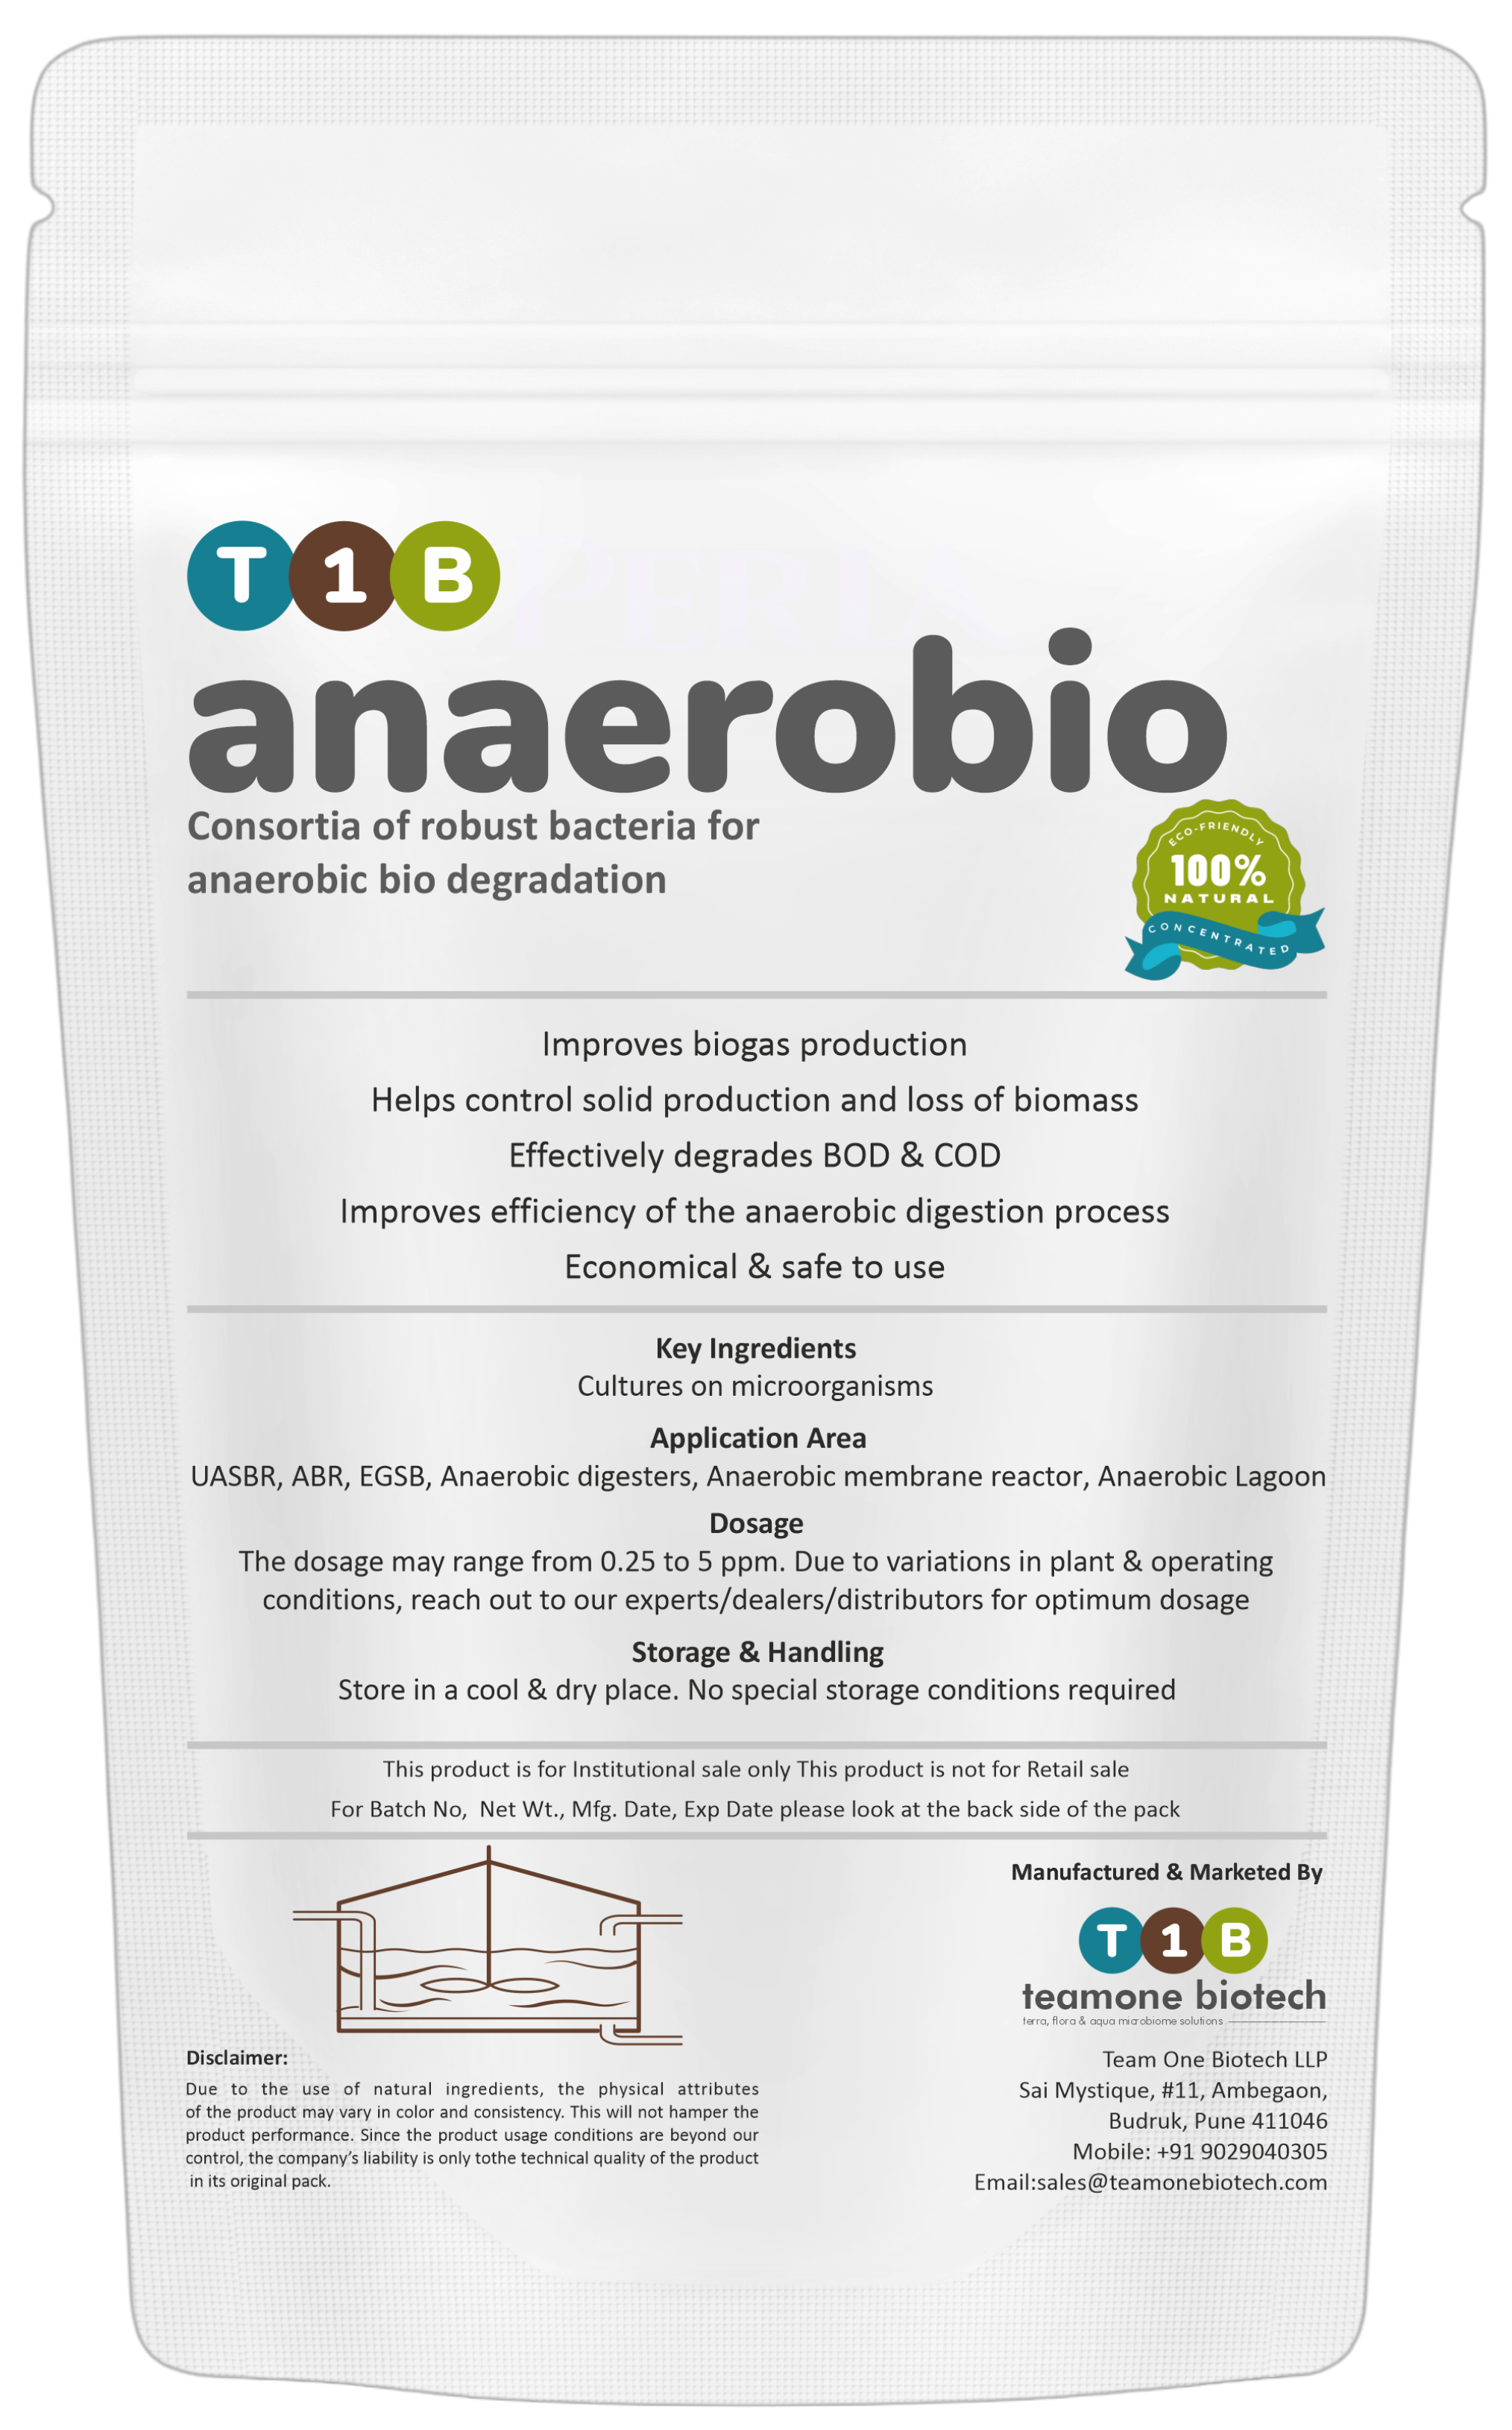 Bacteria for improved biogas and stabilization of your anaerobic unit